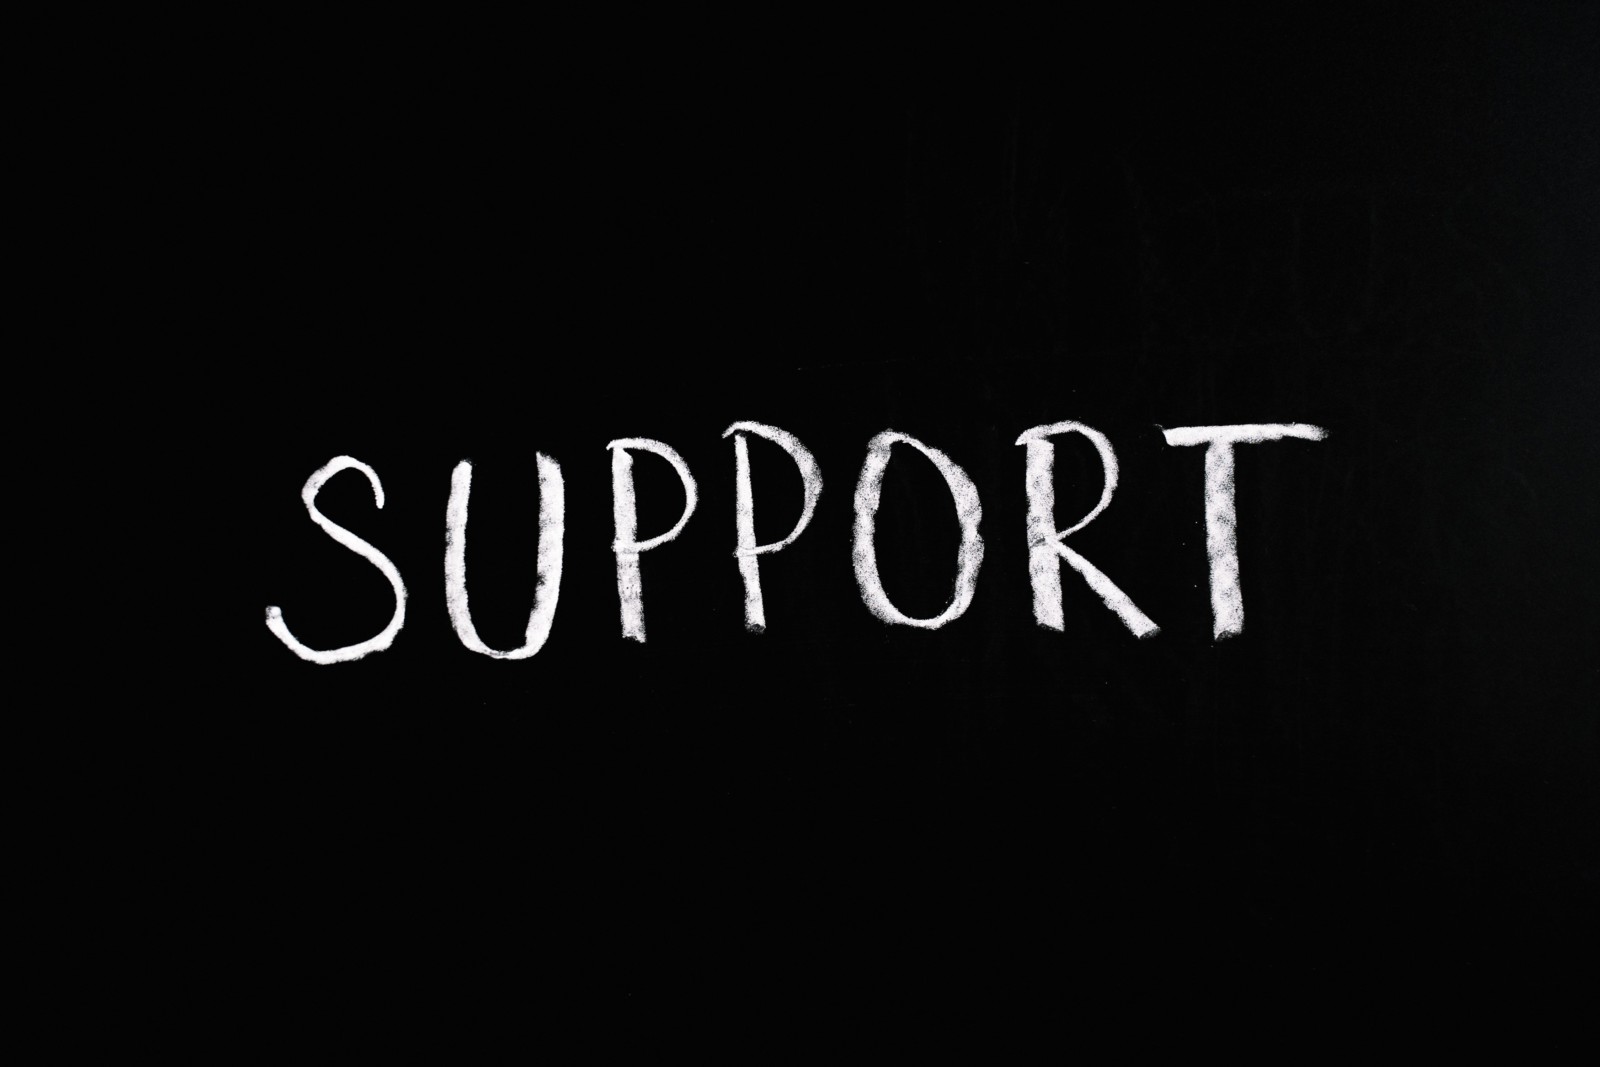 white letters "SUPPORT" on black background